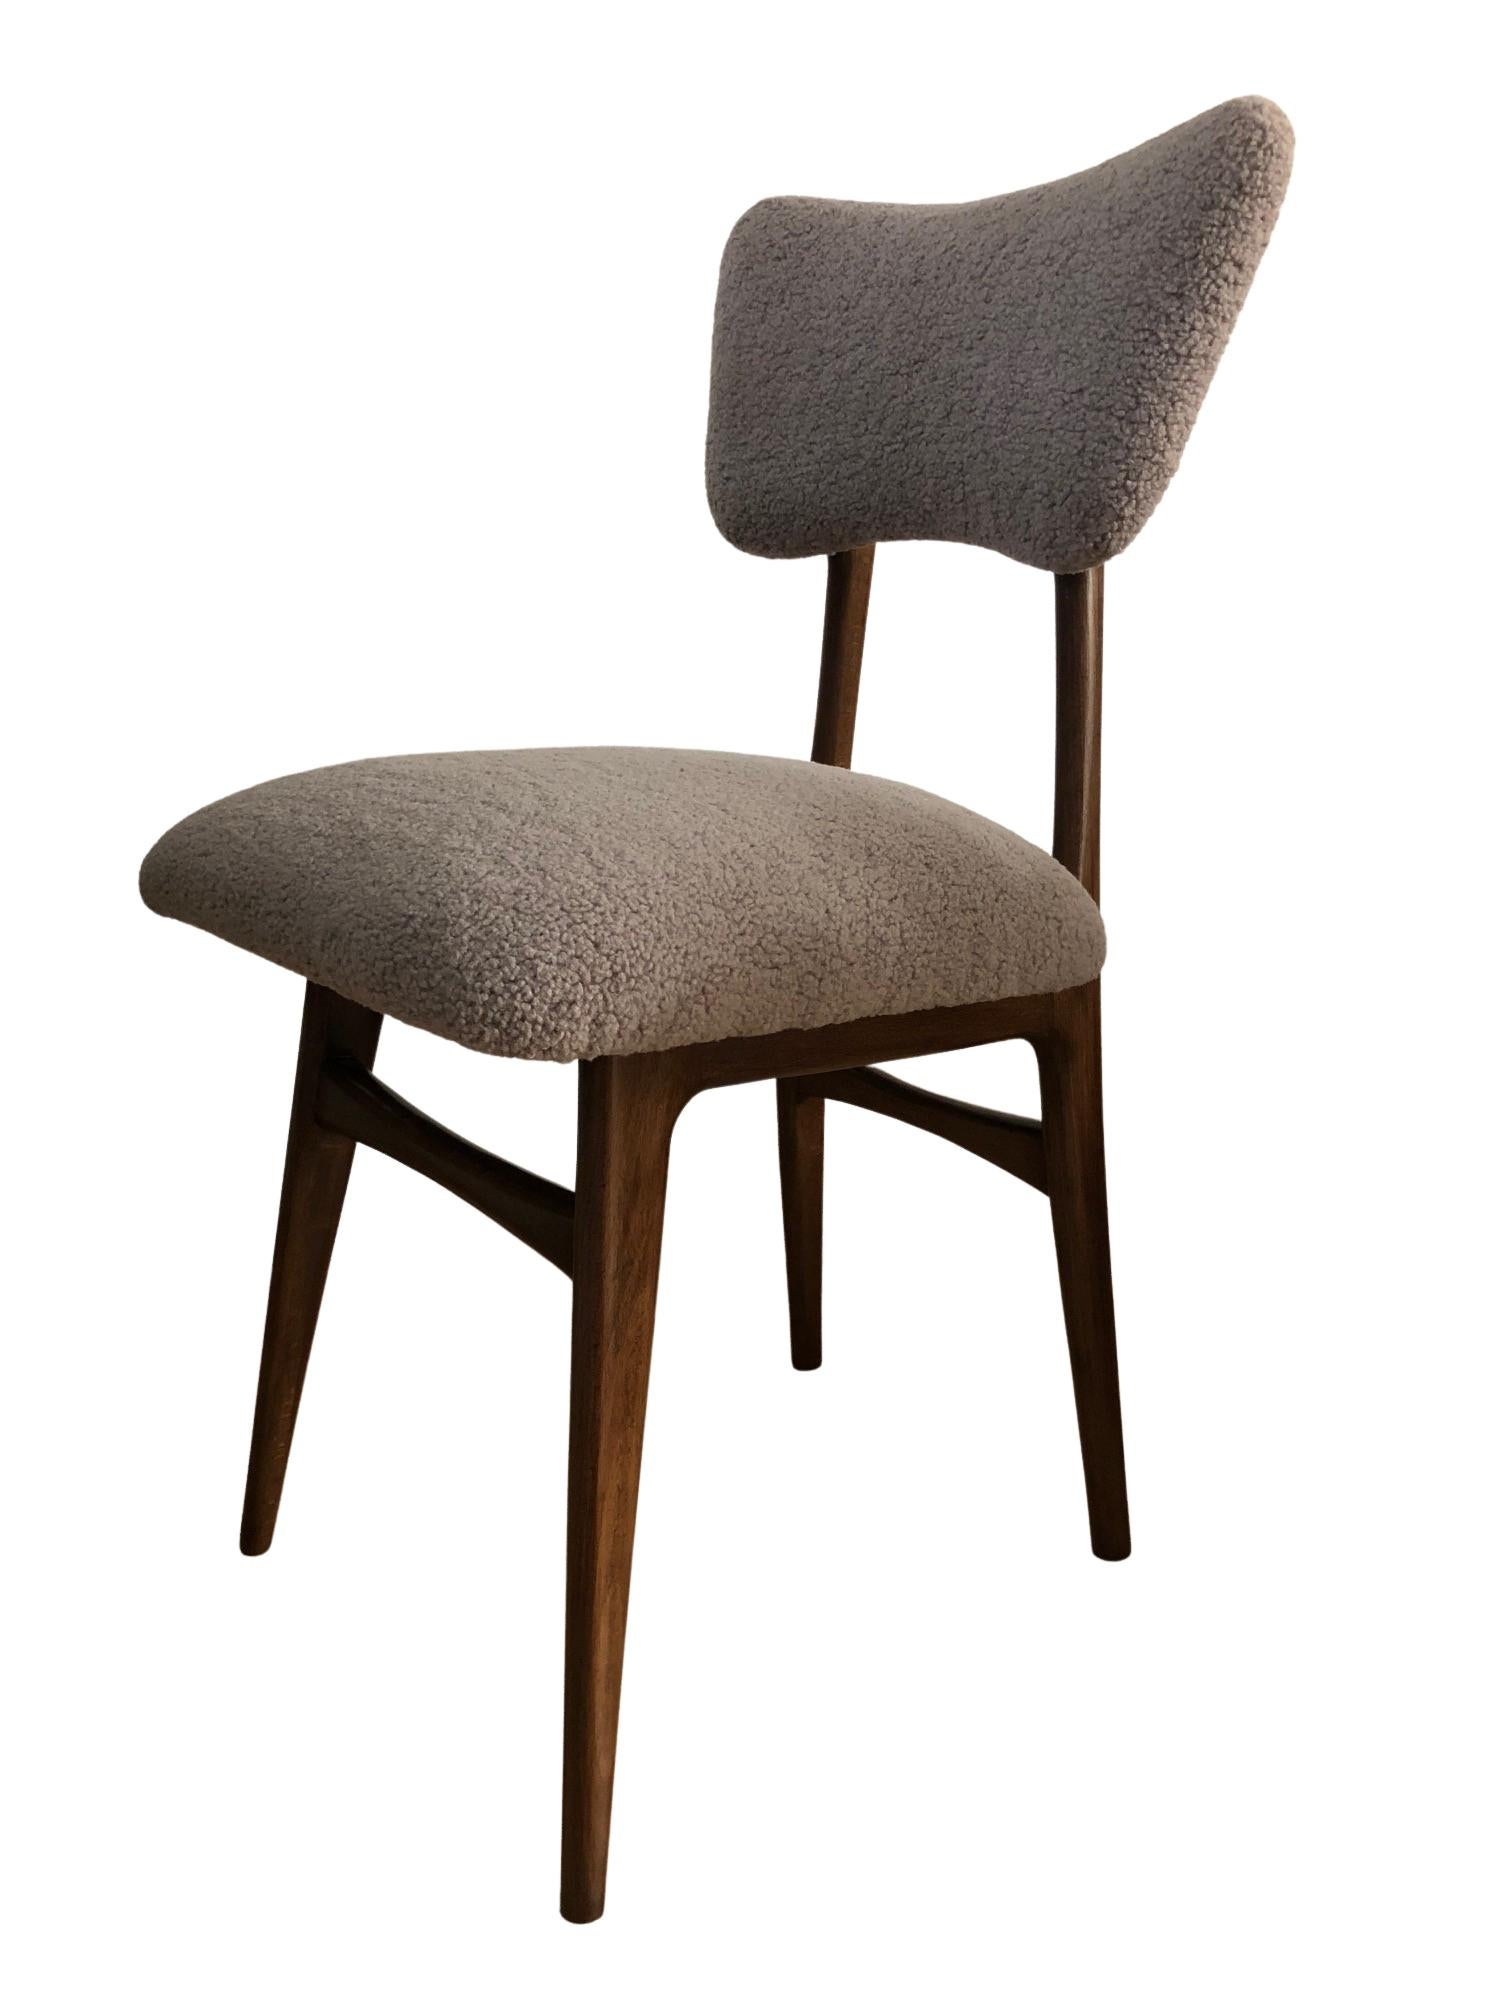 Mid-Century Modern Set of 4 Midcentury Beige Bouclé Dining Chairs, Europe, 1960s For Sale